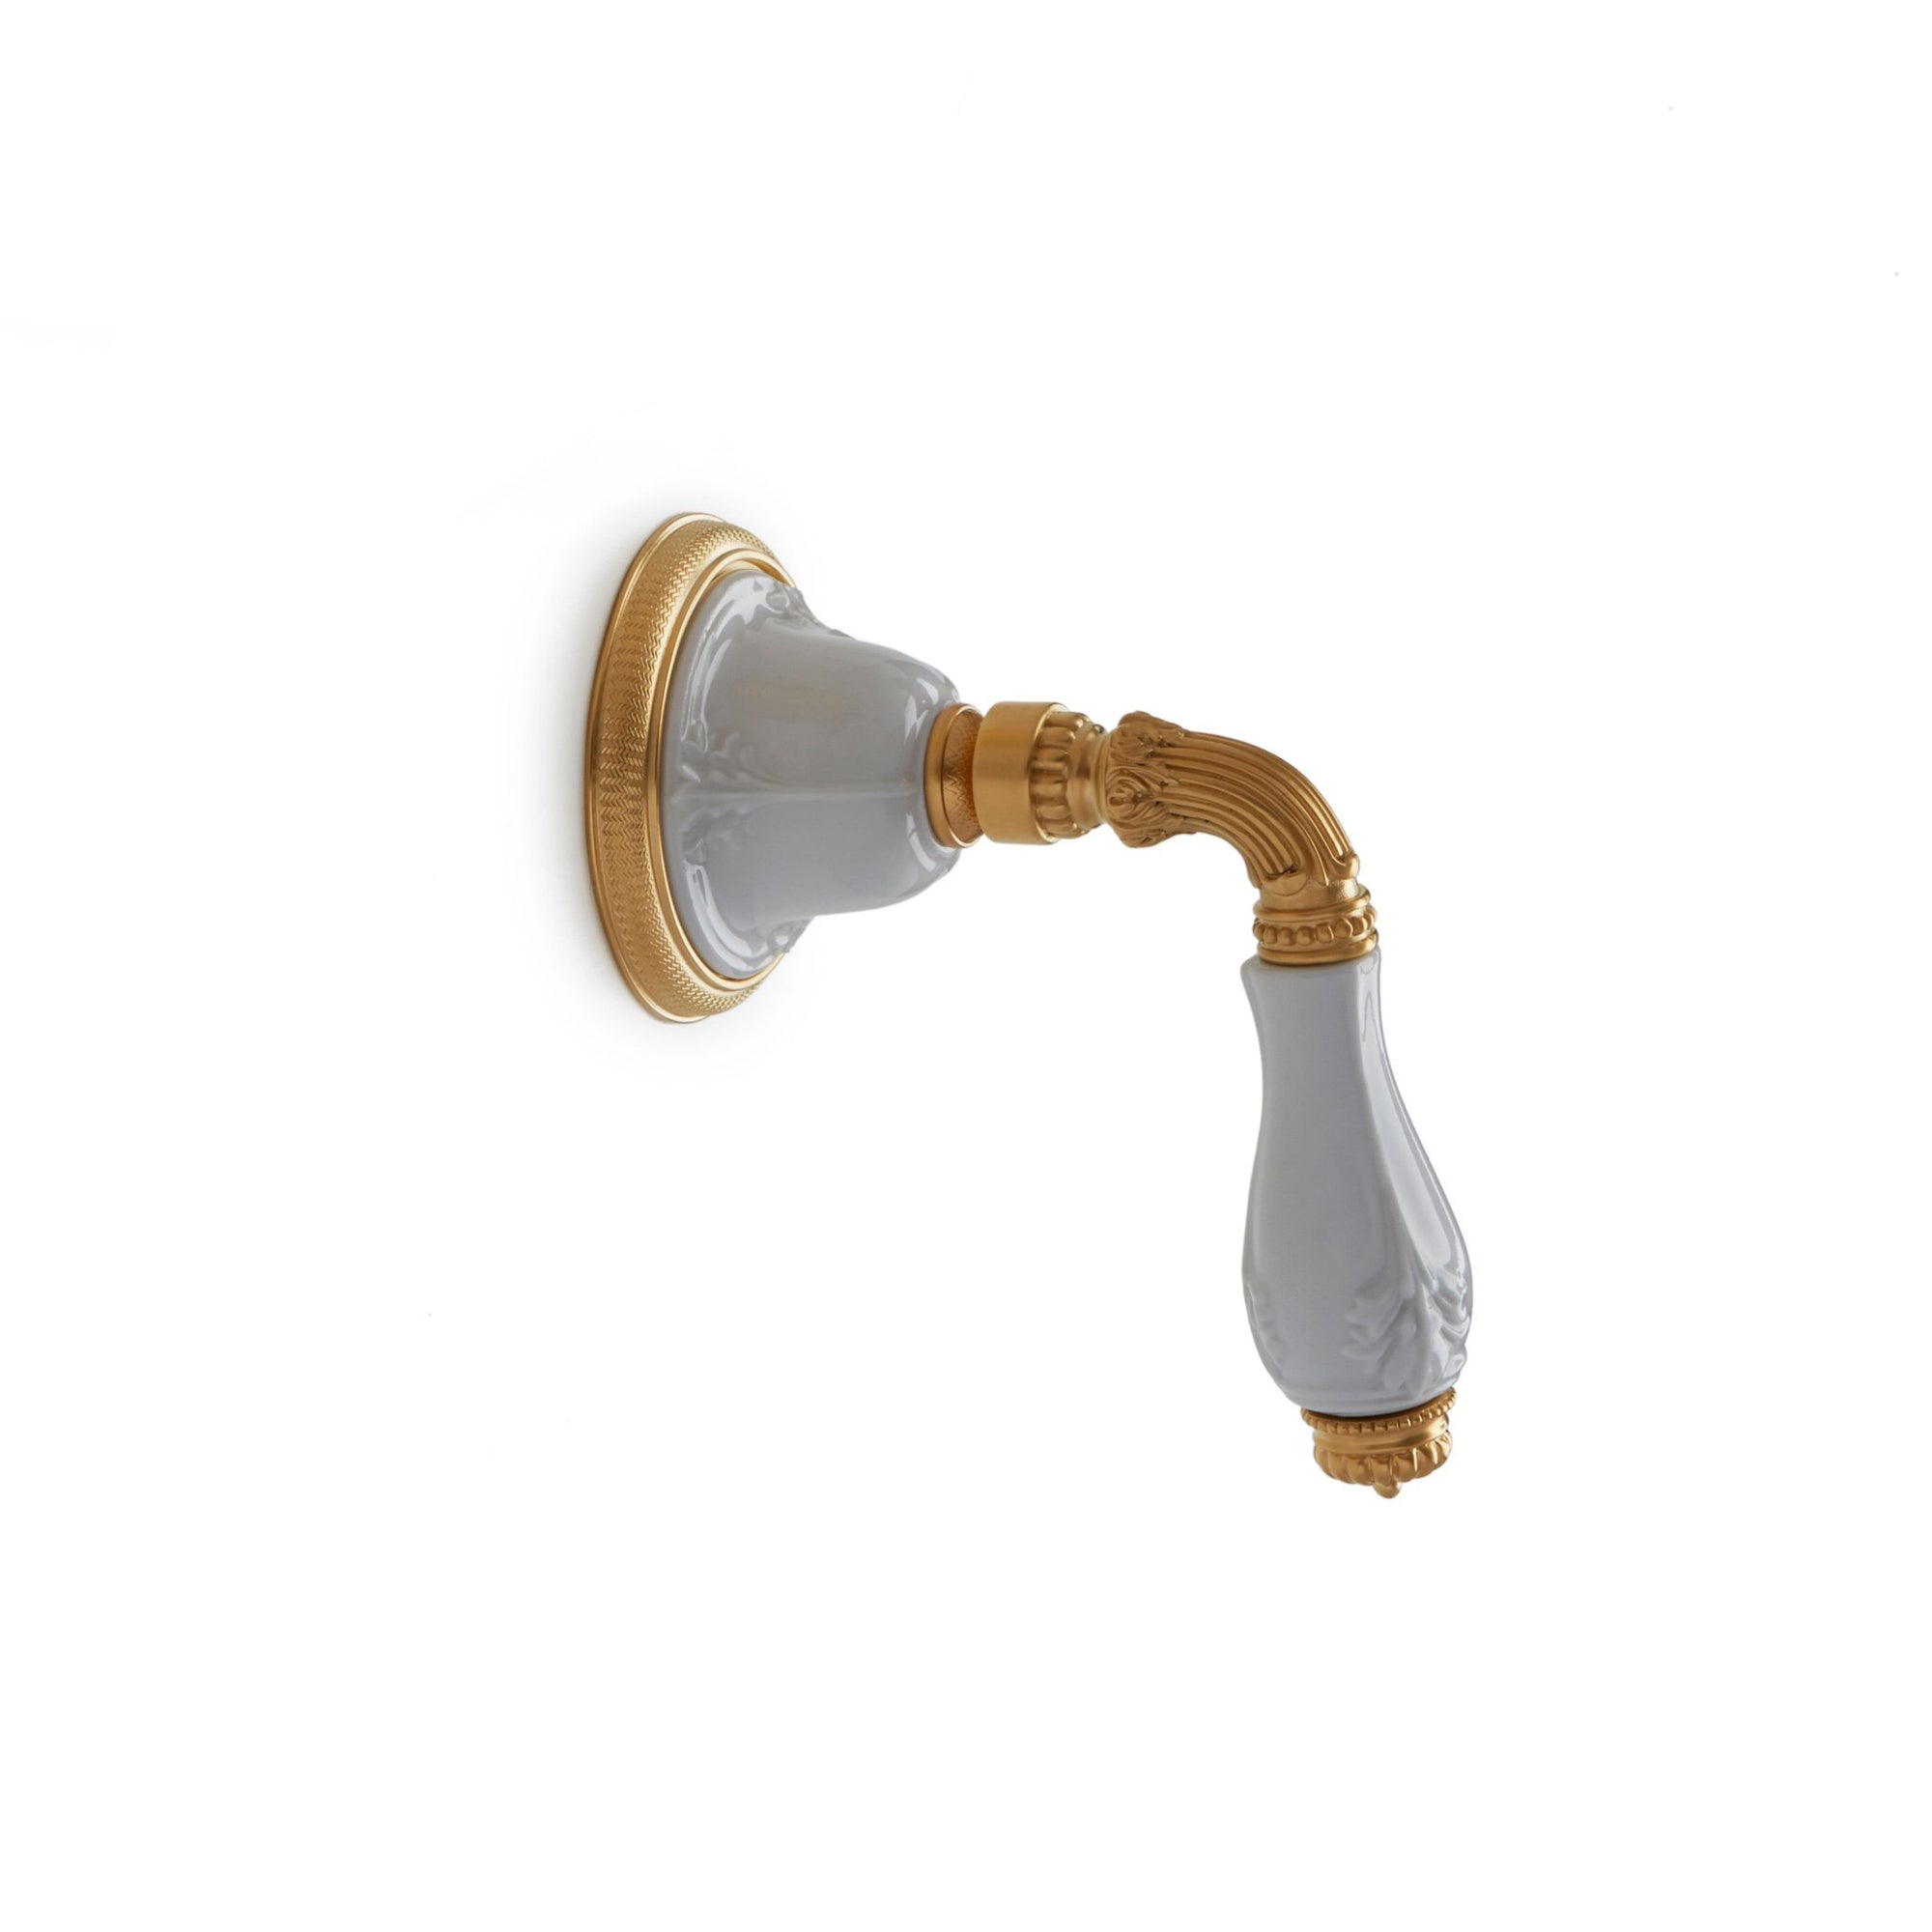 1029LV-ESC-04WH-GP Sherle Wagner International Provence Ceramic Fluted Lever Volume Control and Diverter Trim in Gold Plate metal finish with White Glaze inserts